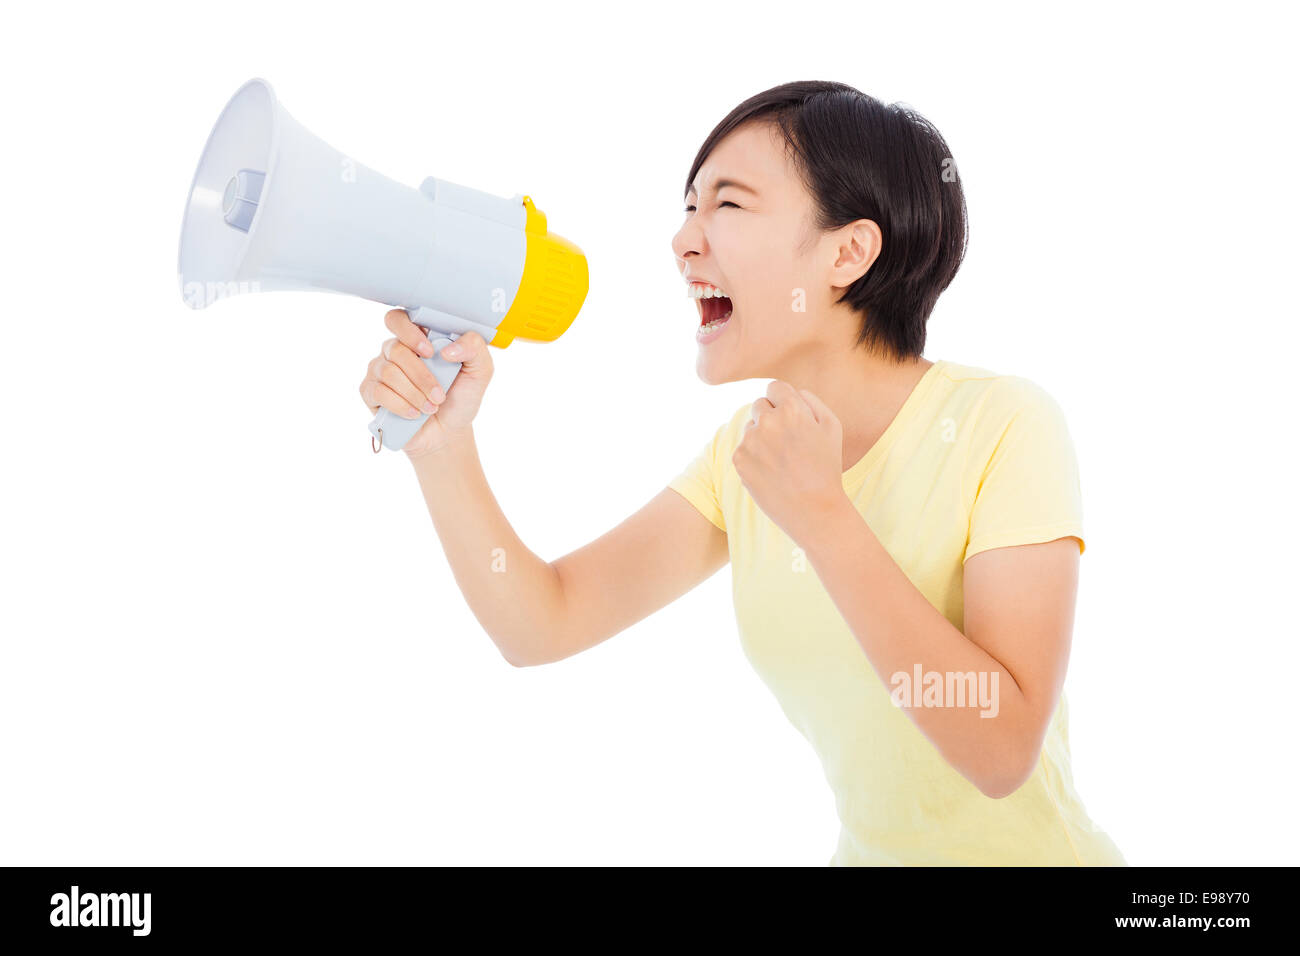 happy young student girl standing and holding megaphone Stock Photo